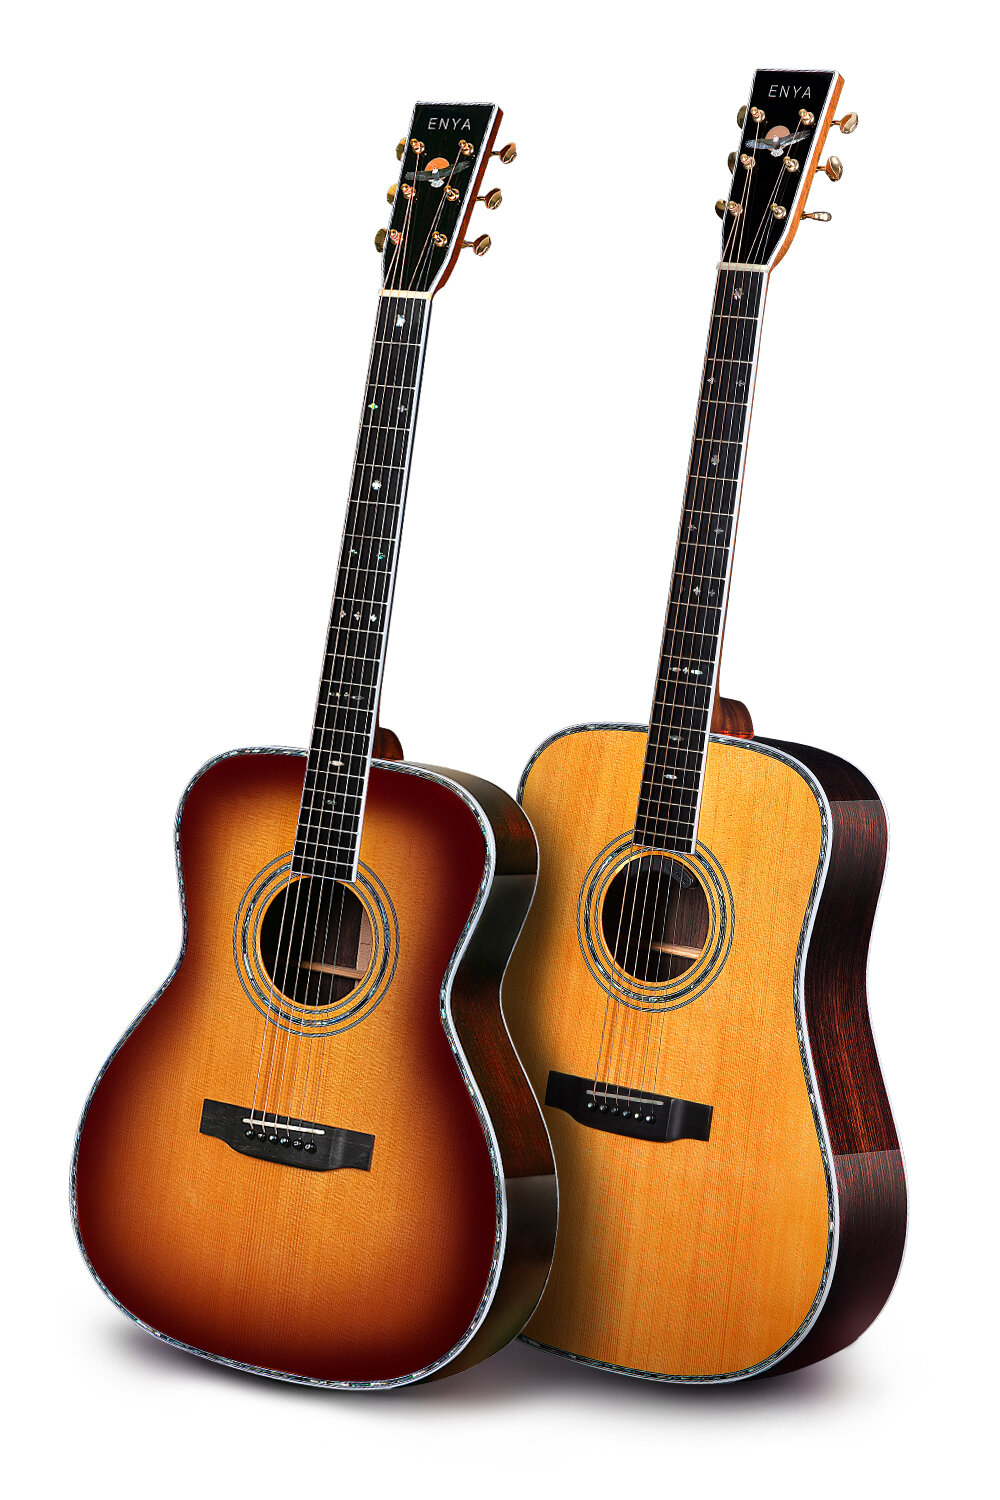 Two colors are available! - ENYA T10s provides you with 41-inch OM and Dreadnought body. With natural and a new sunset burst color to bring you the classic color option.Provide more choices for your different visual preferences!